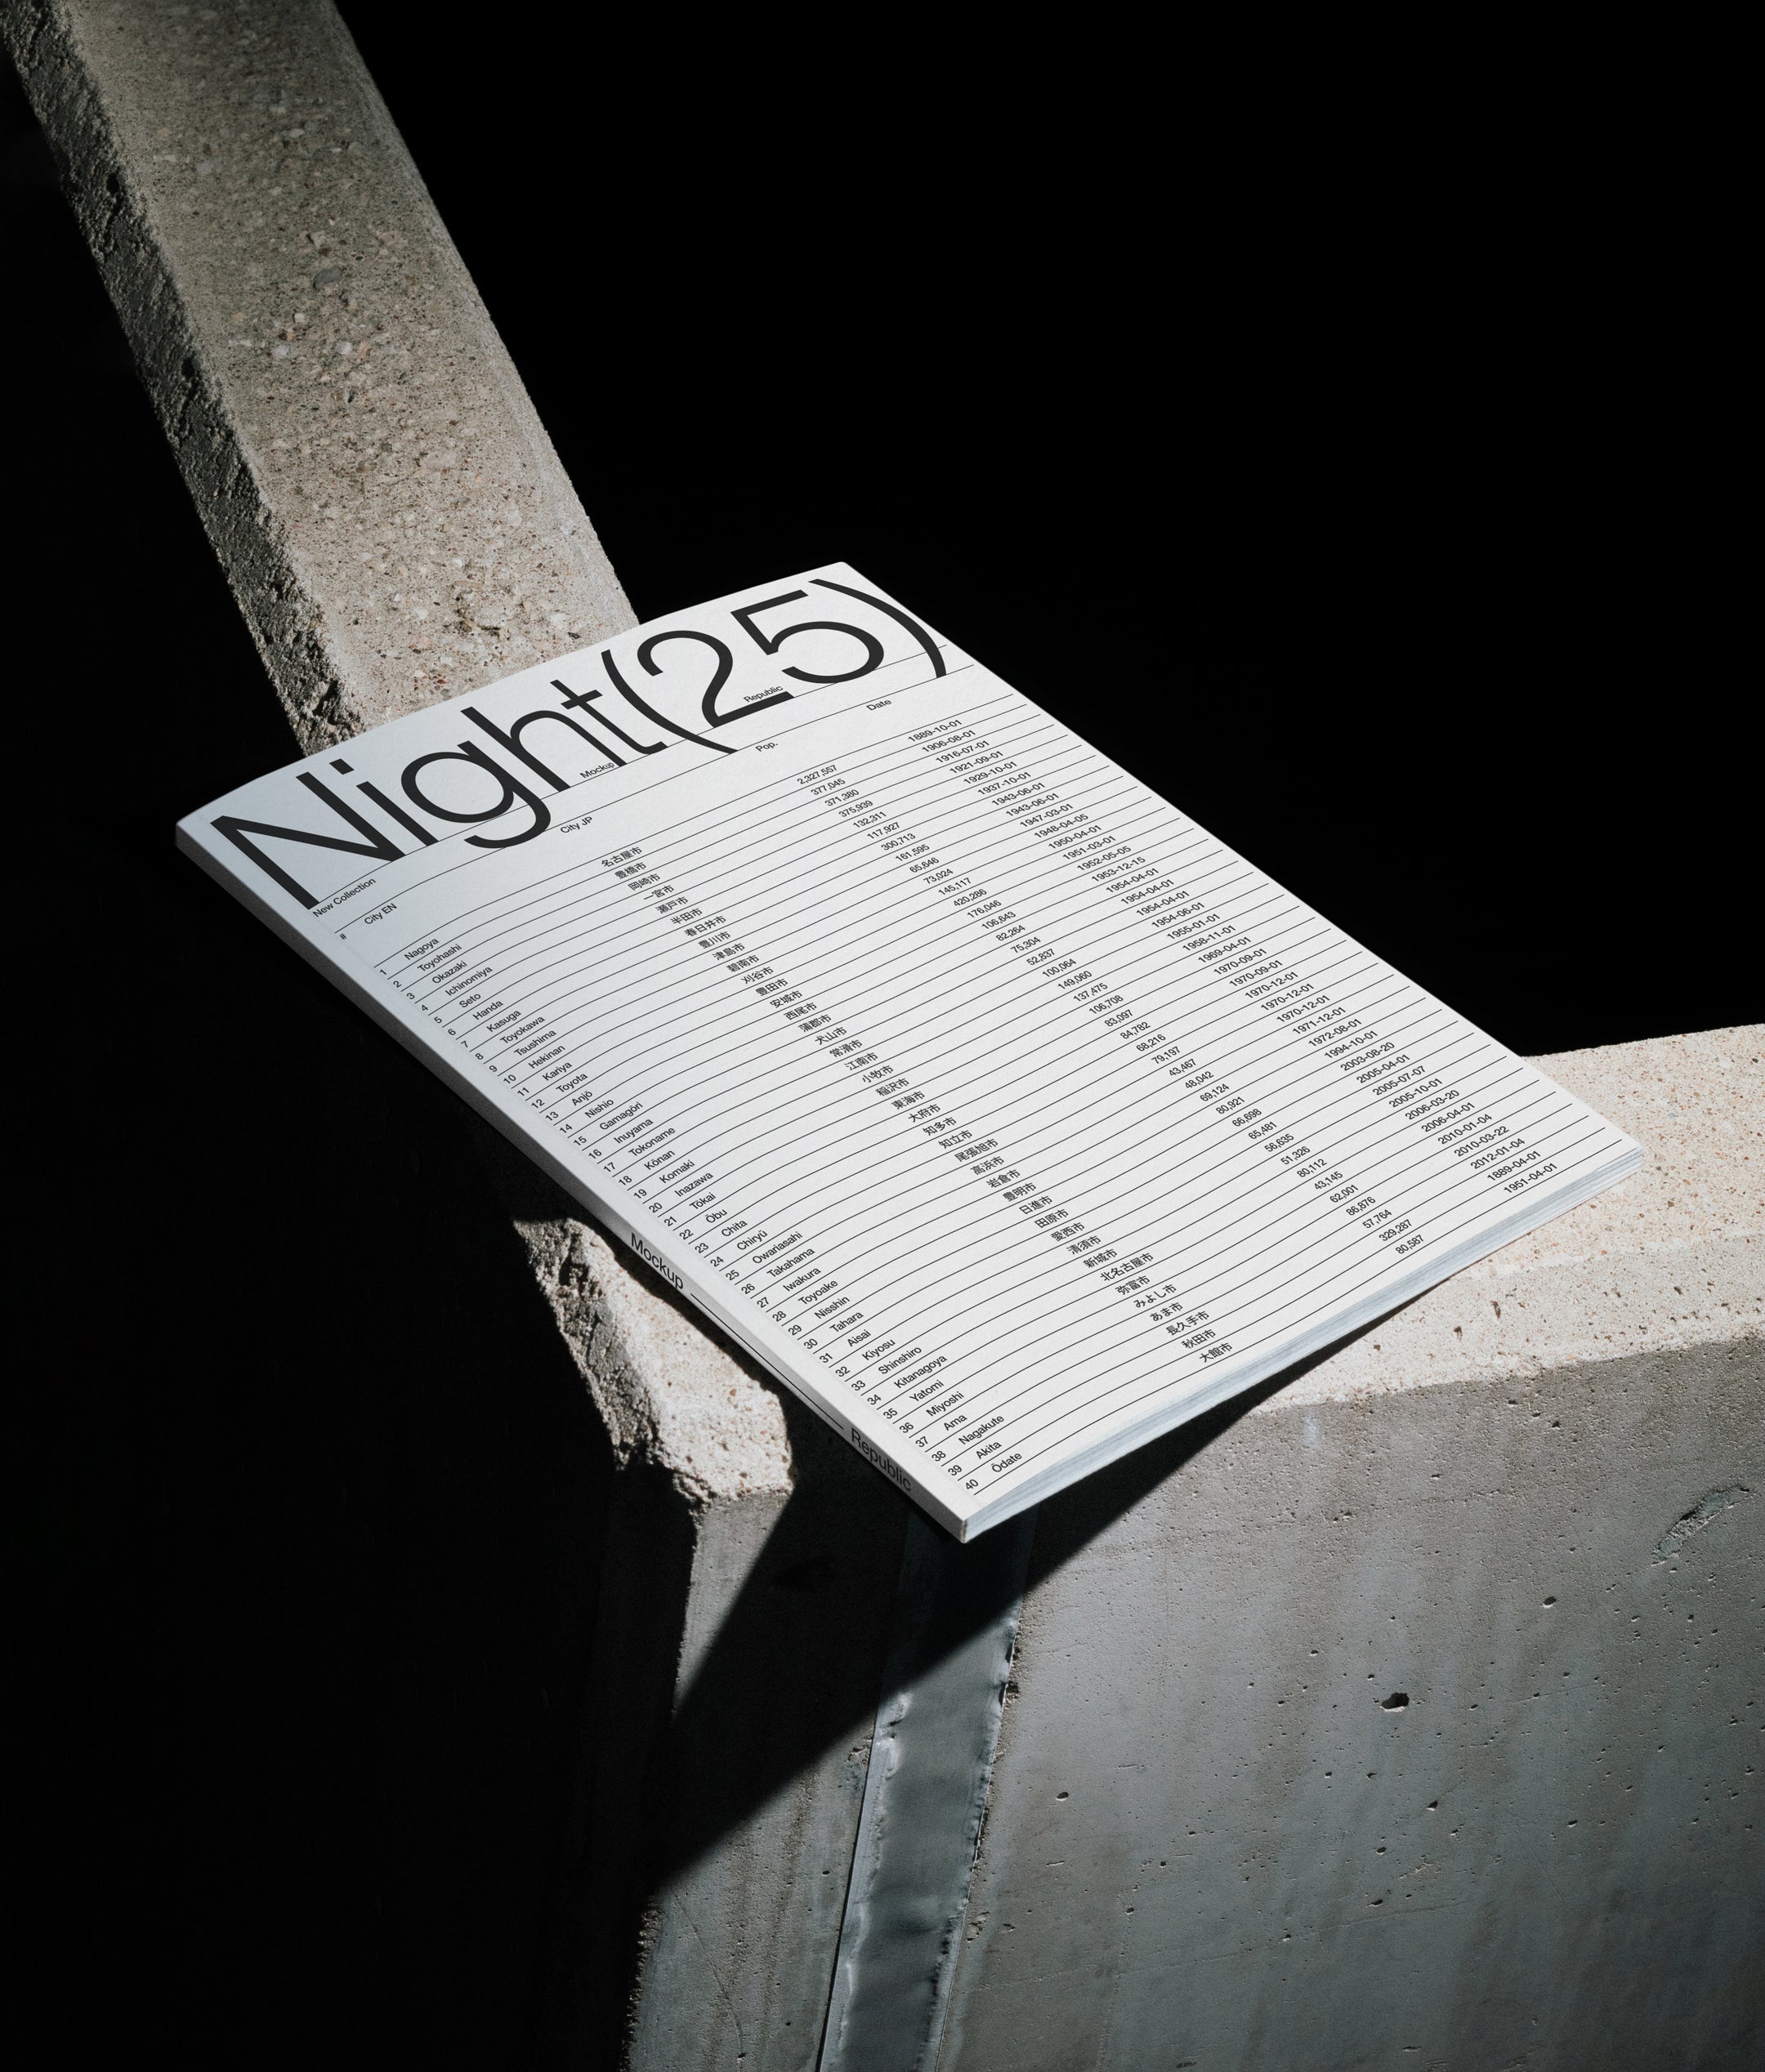 Concrete Night Collection